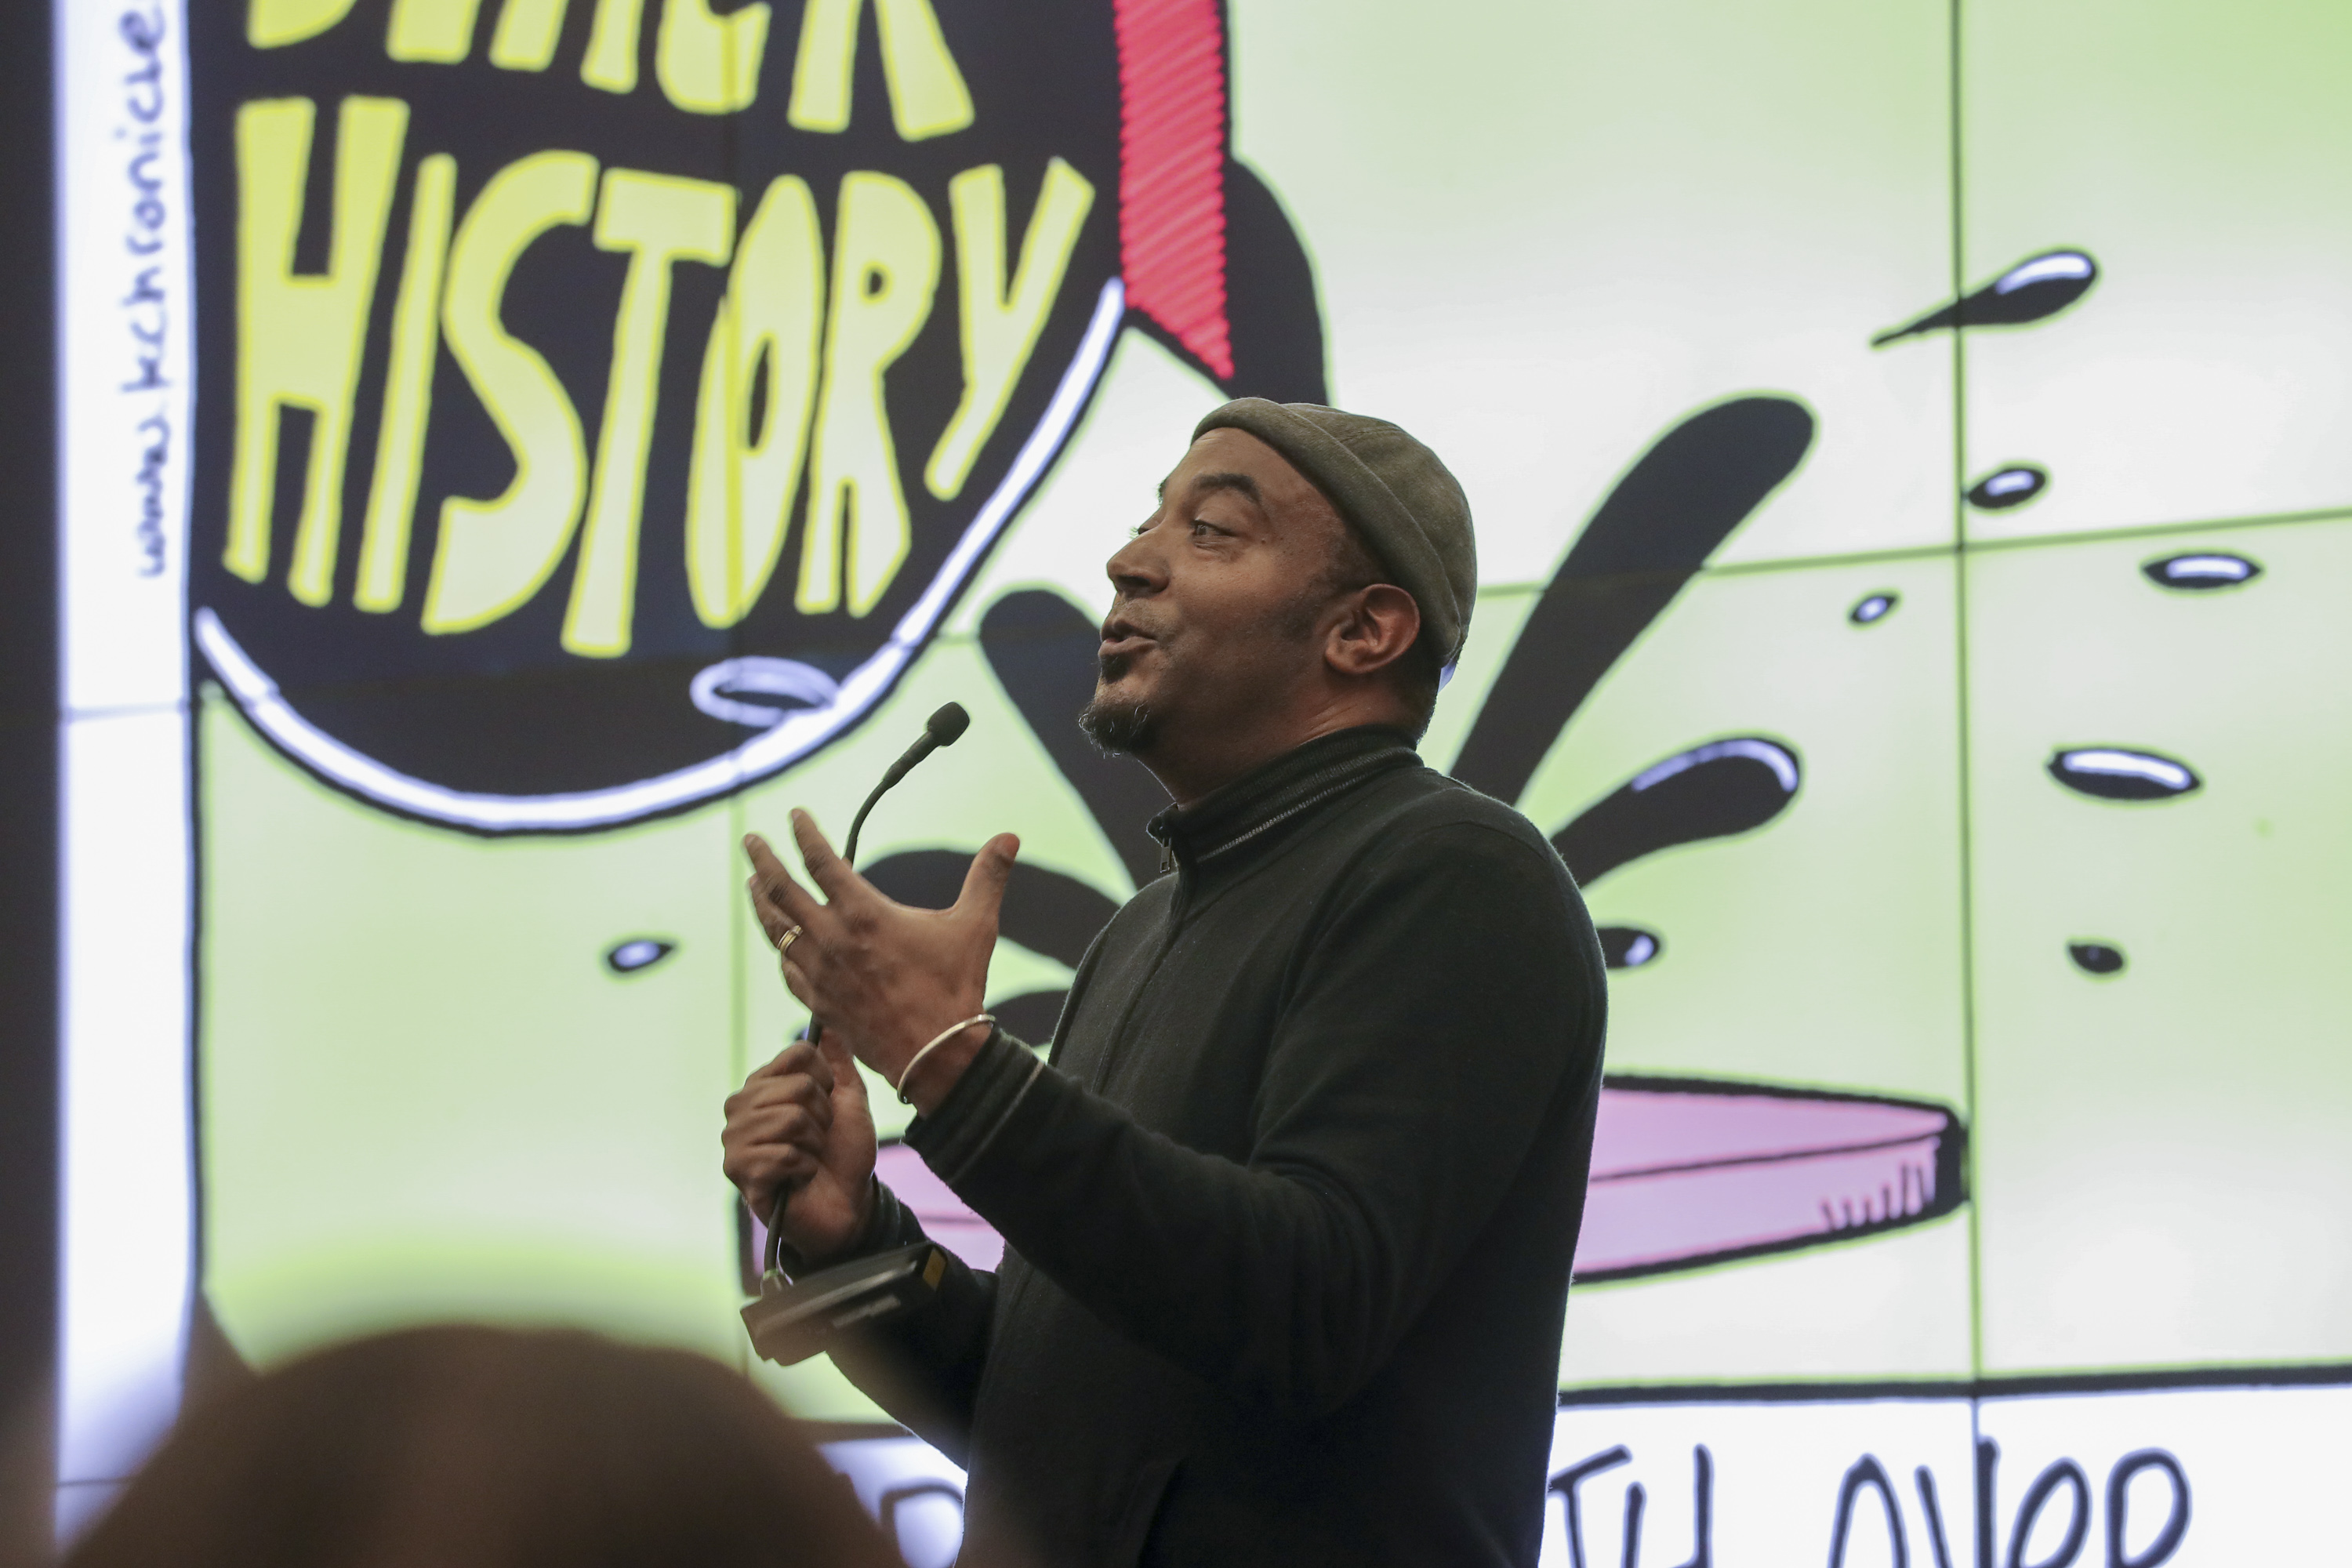 Cartoonist Keith Knight speaking in front of a screen showing some of his art at the annual Black History Month Lecture